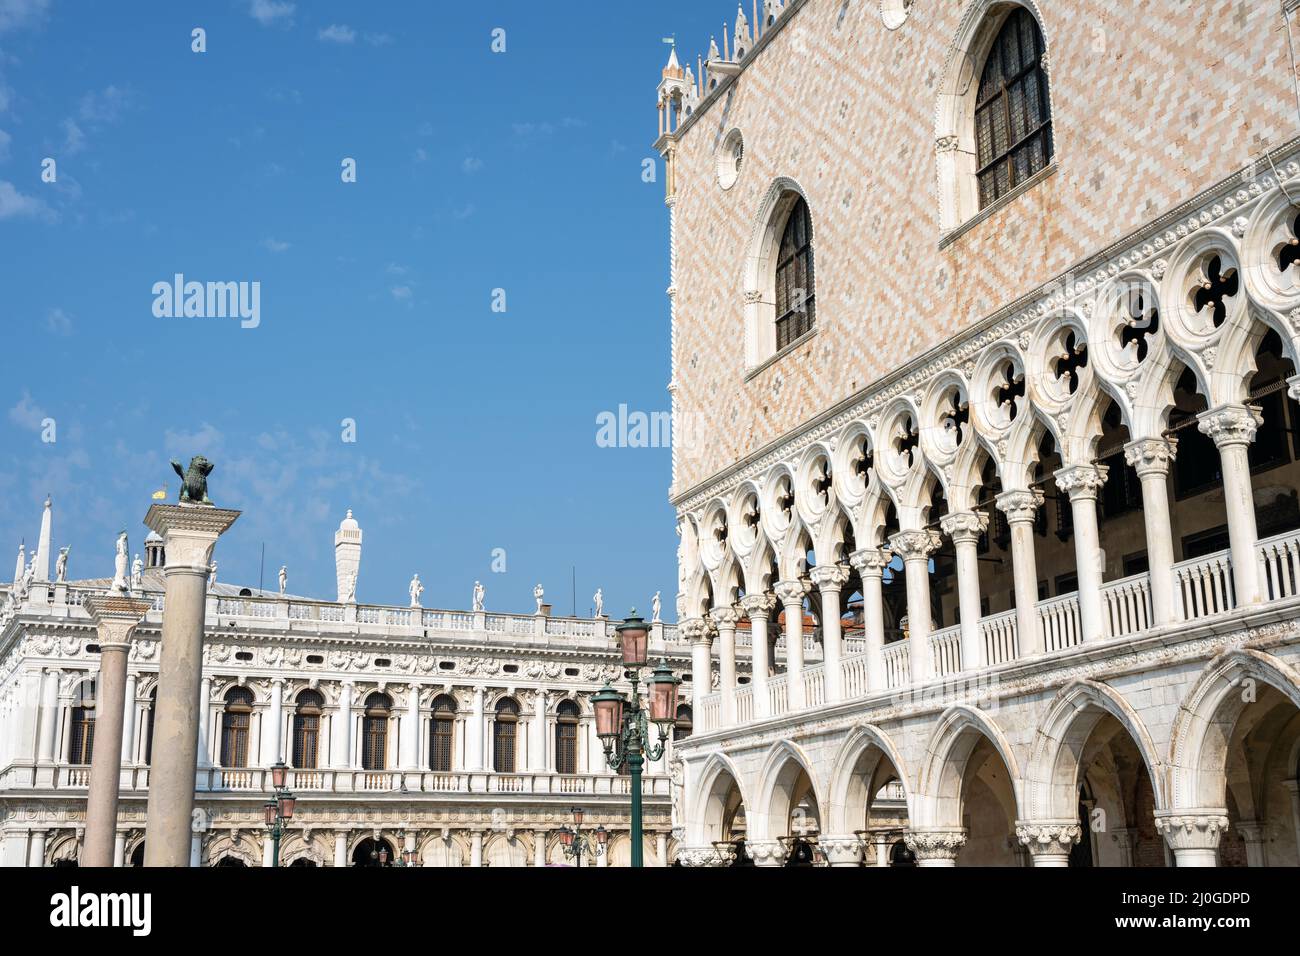 Part of the famous Doges Palace and the Marciana Library, seen in Venice, Italy Stock Photo